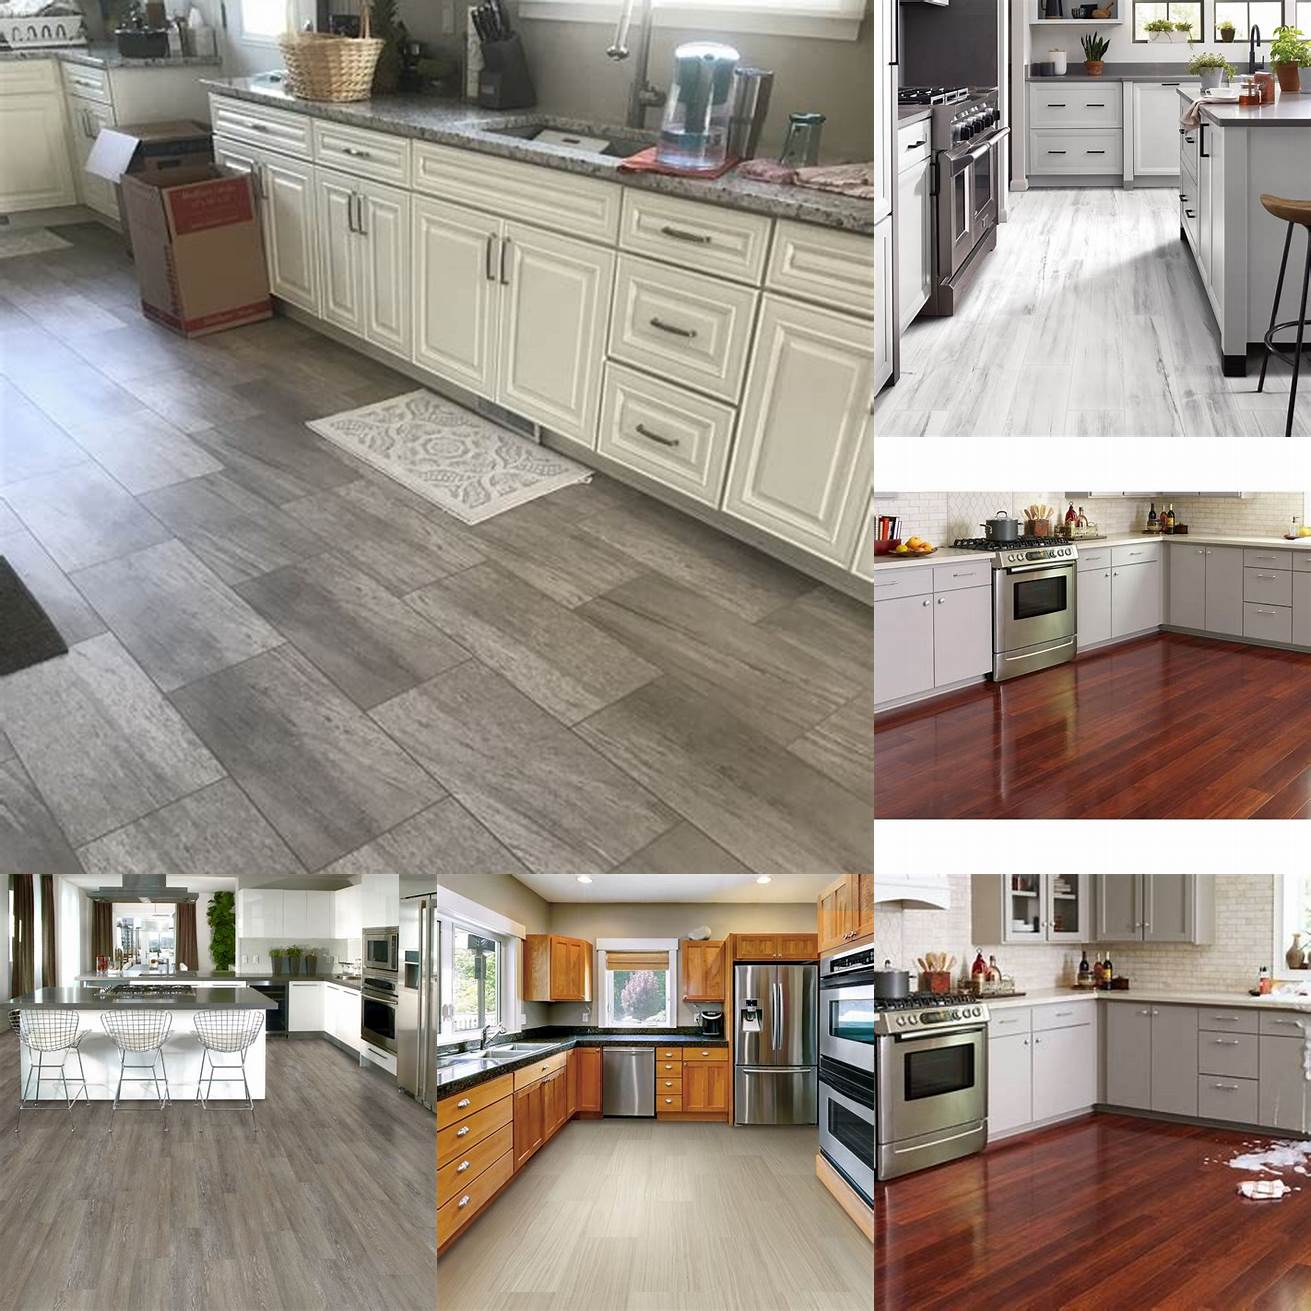 Water-resistant Vinyl is highly water-resistant making it perfect for kitchens where spills and moisture are common It can withstand water spills without warping or staining